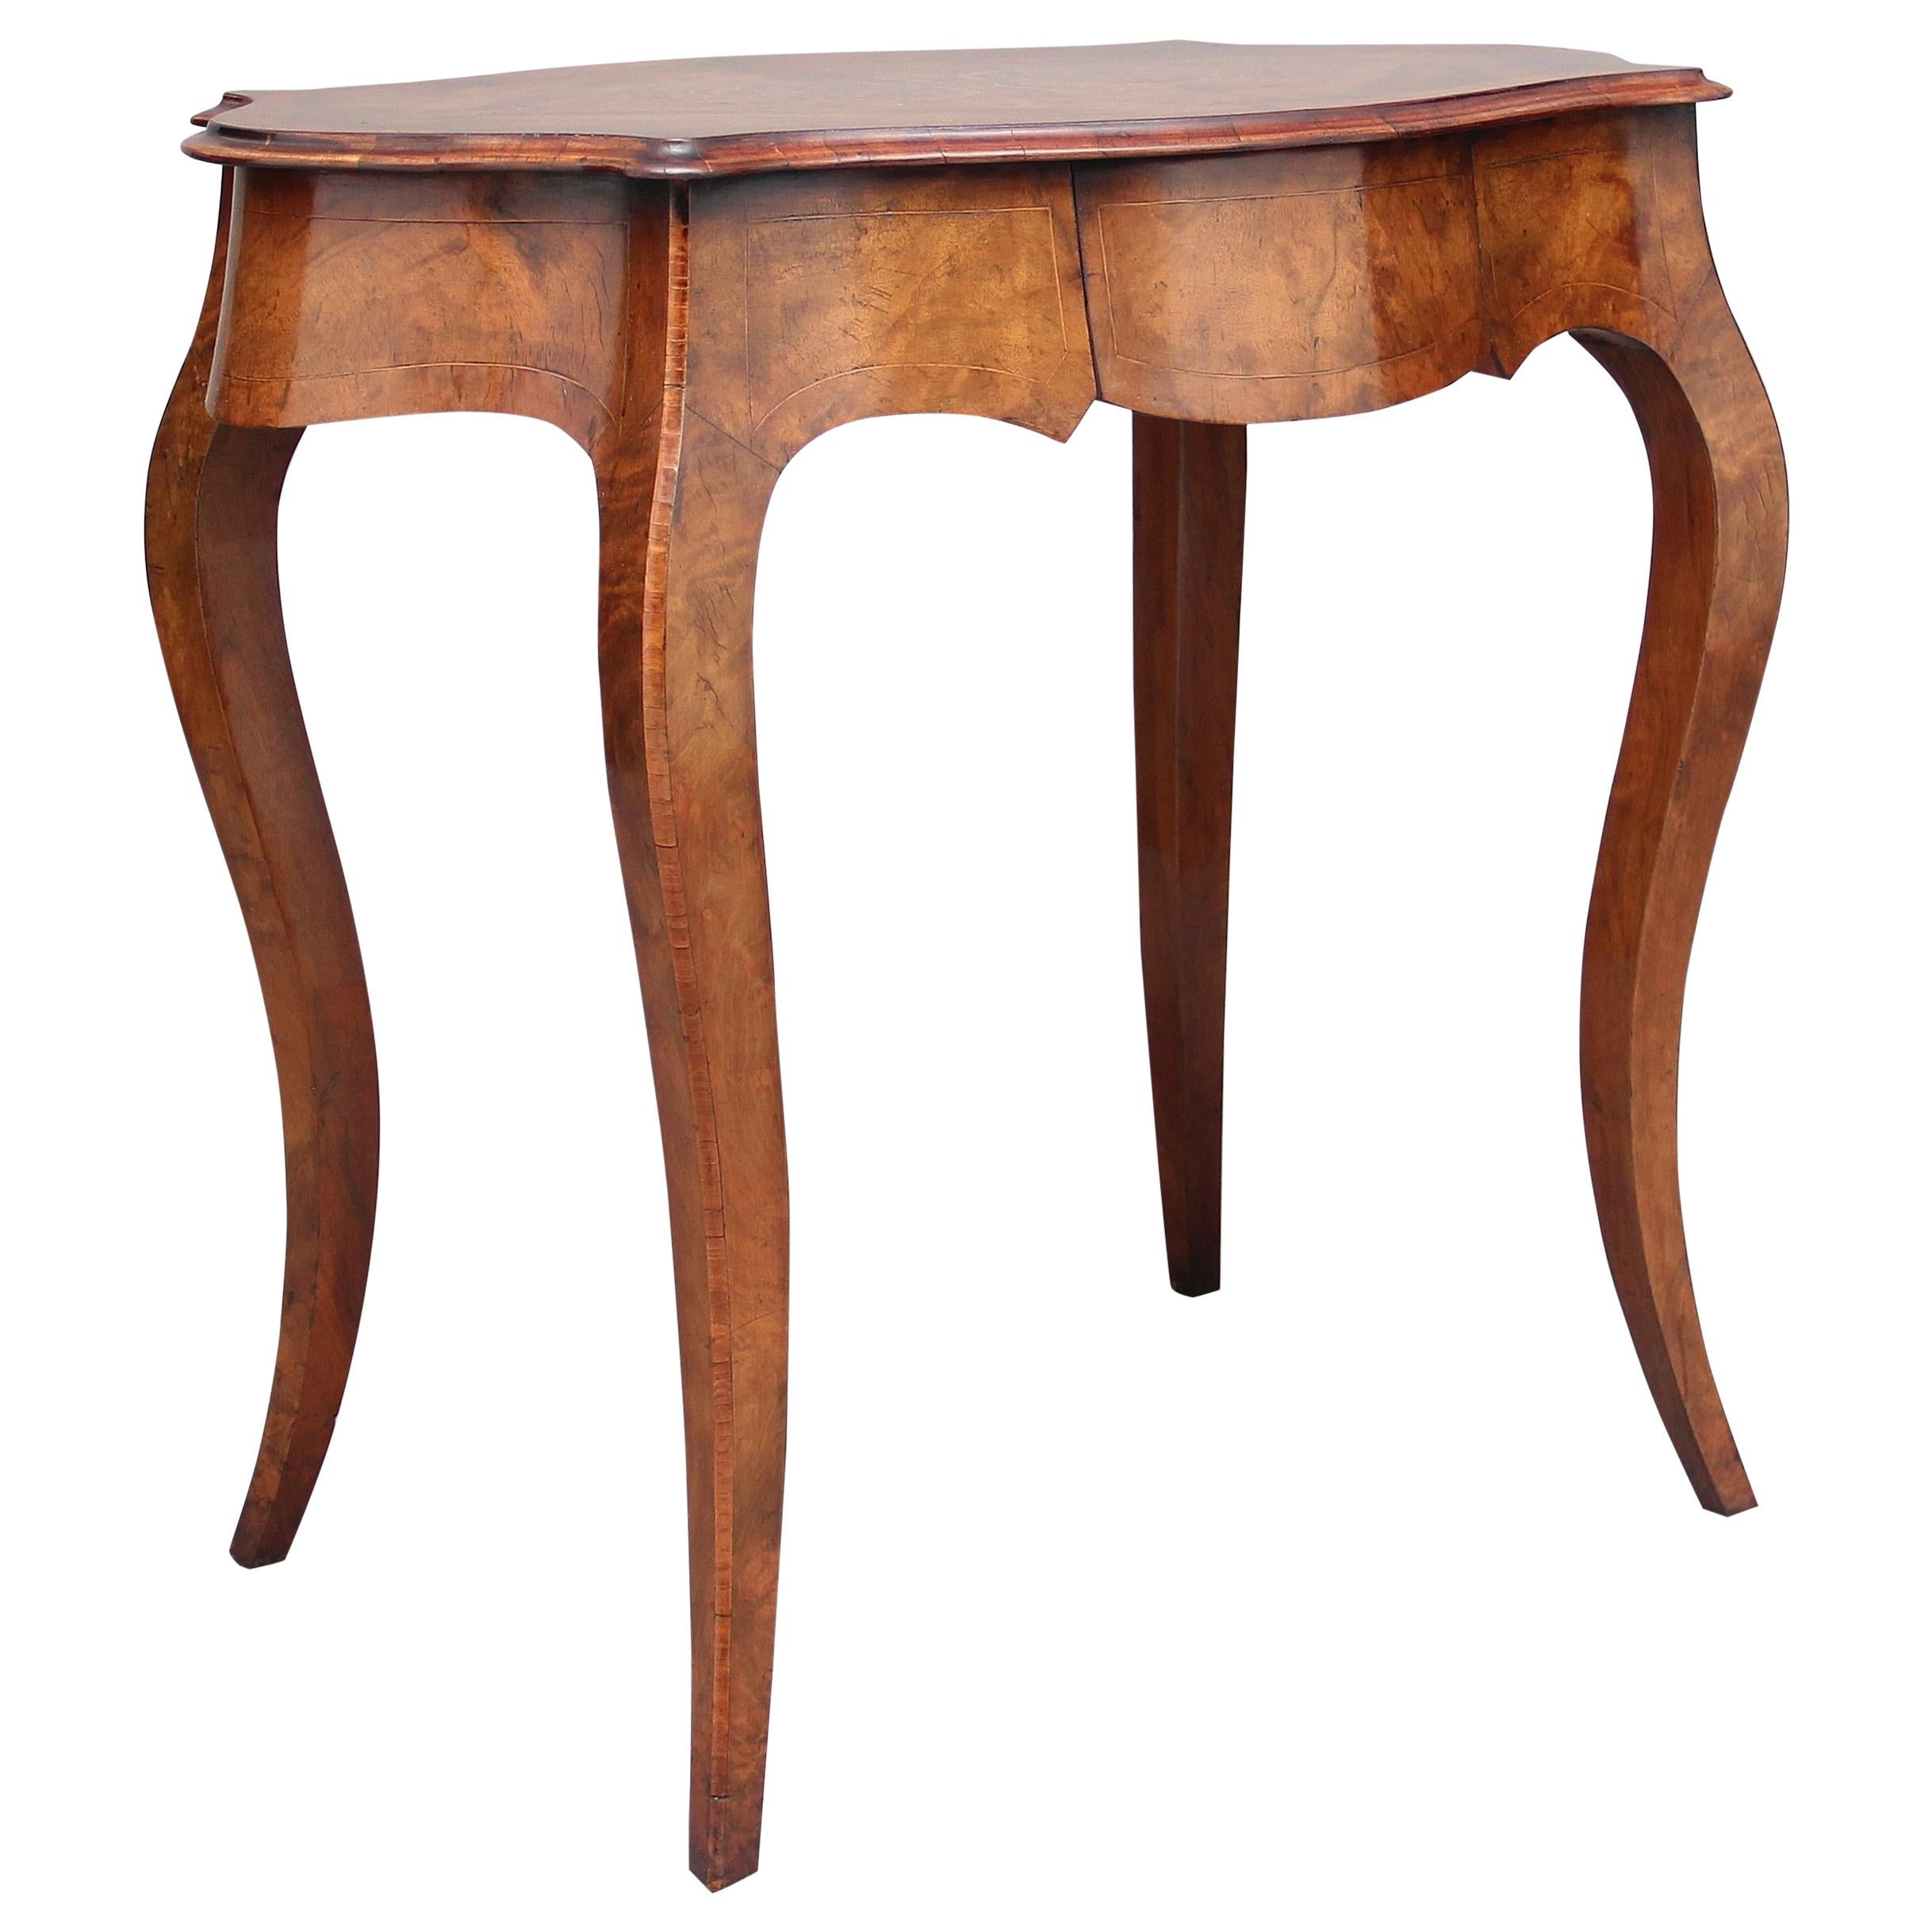 19th Century Walnut and Boxwood Line Centre Table